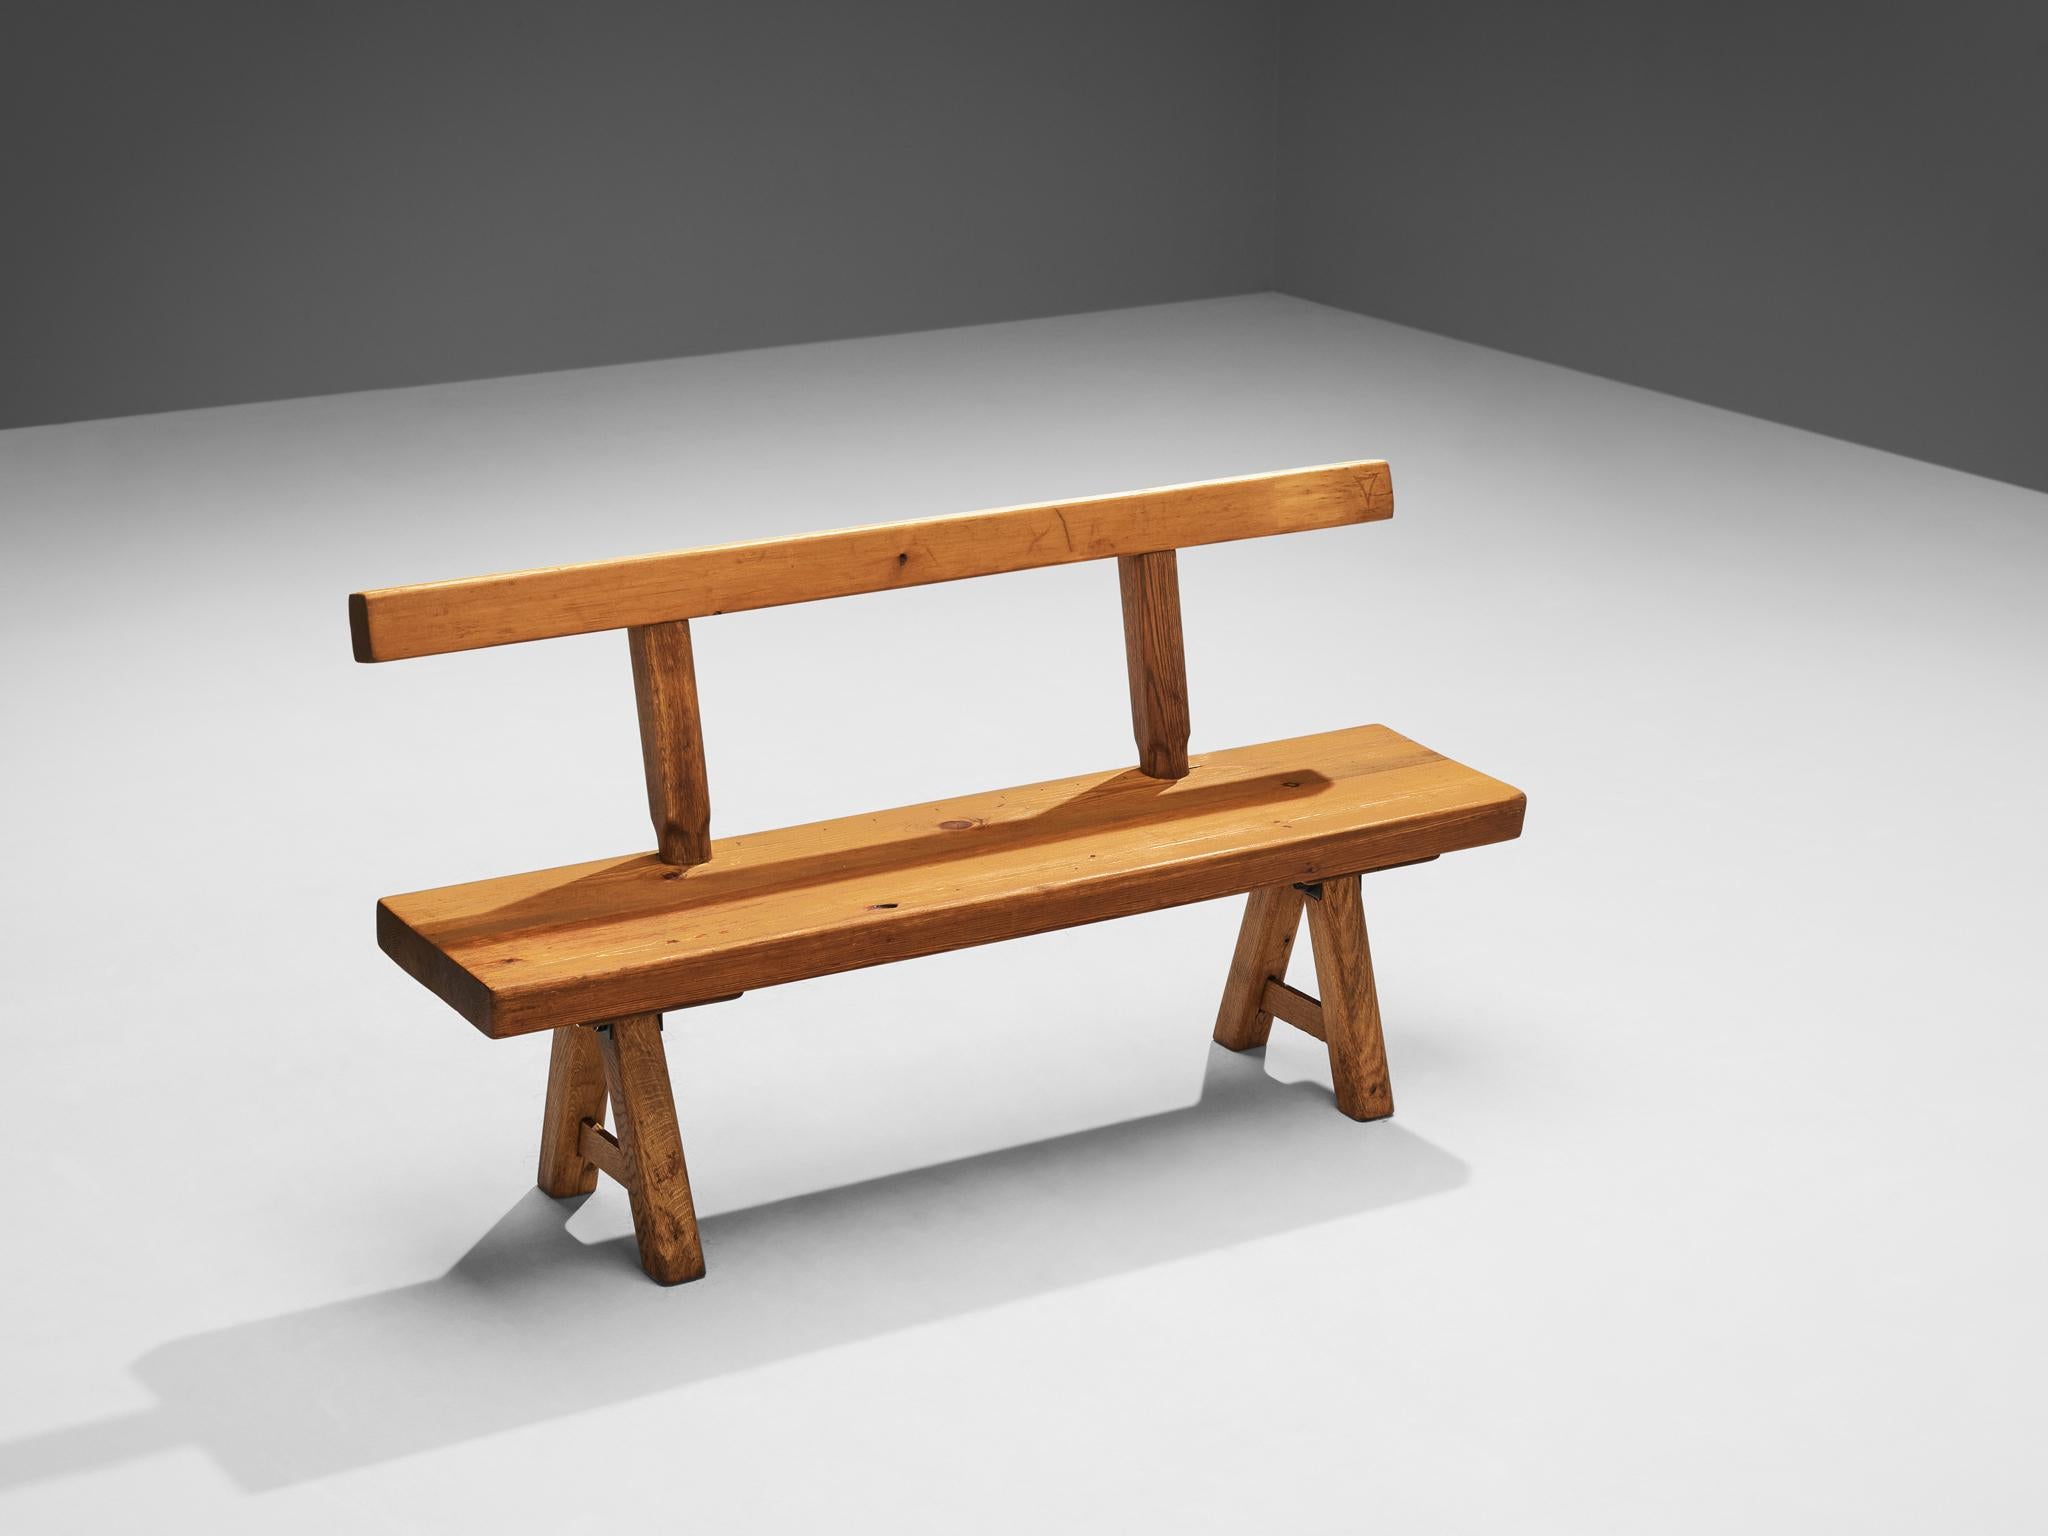 Mobichalet, bench, oak, pine, Belgium, 1950s

This rustic bench will come forward nicely in a relaxing atmosphere, like a patio or a studio space. The brutalist appearance is expressed through robust forms and strong lines. The viewer can follow the